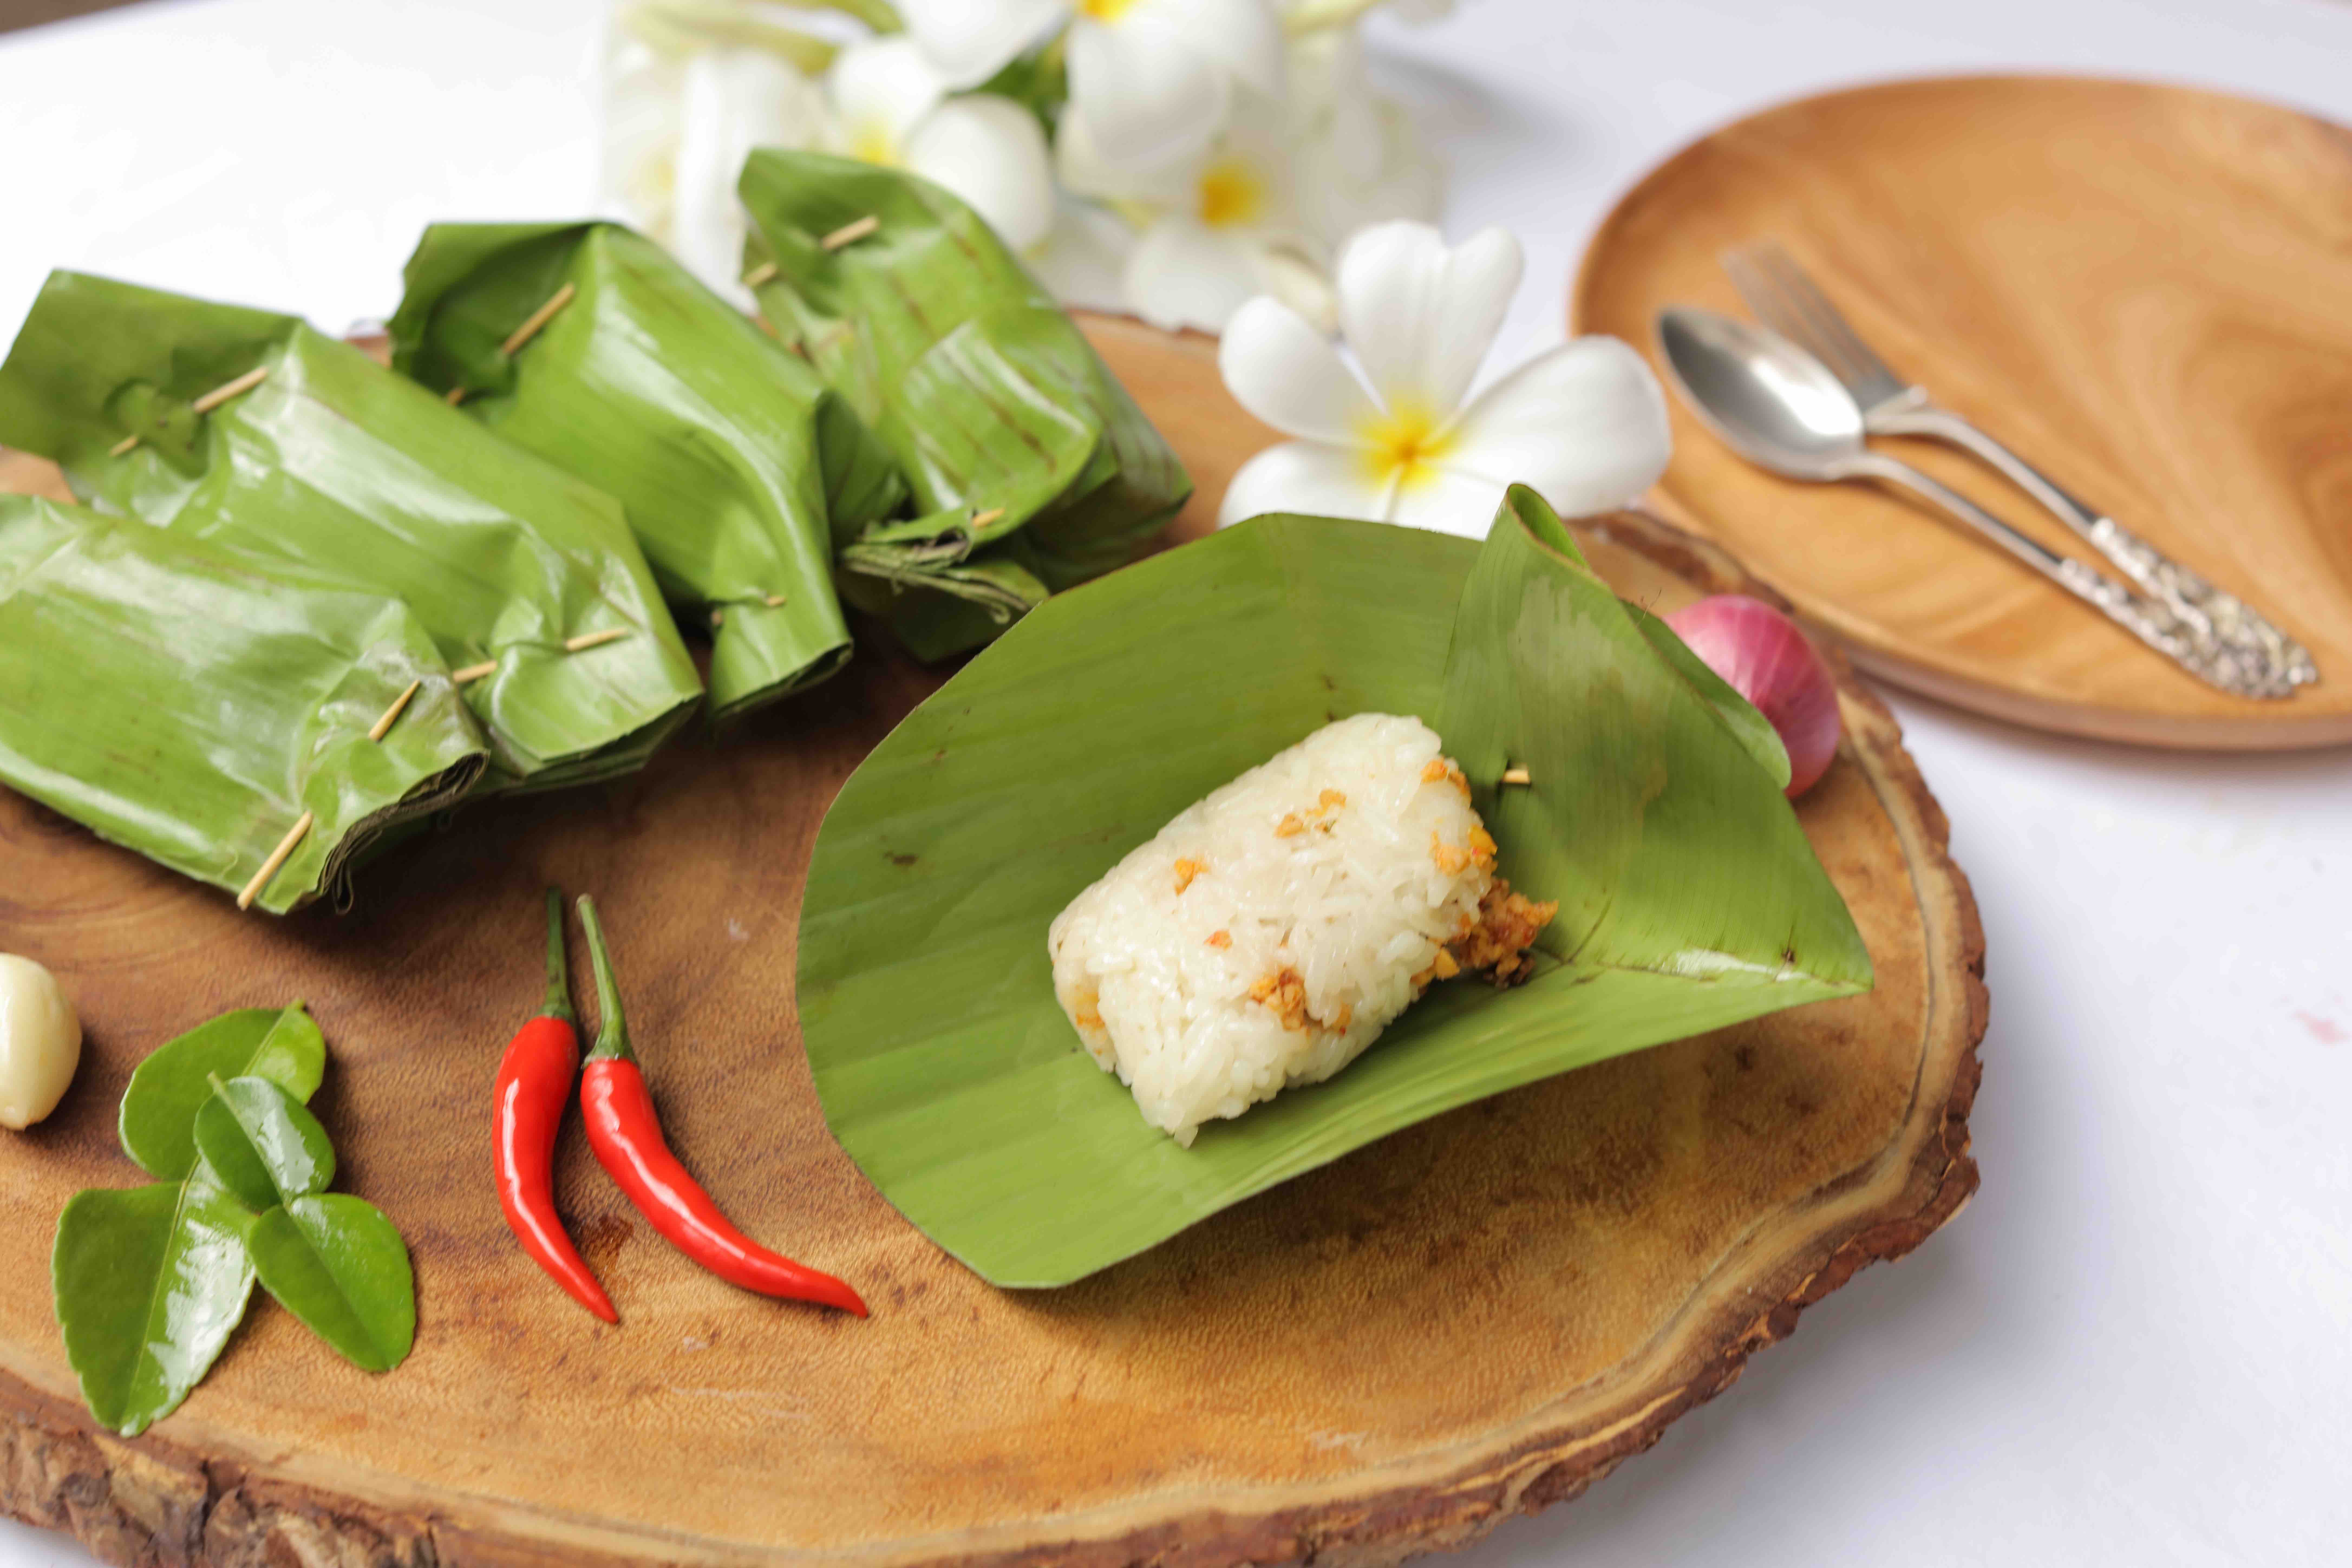 Indonesian Sticky Rice Parcels - Sarab Kapoor